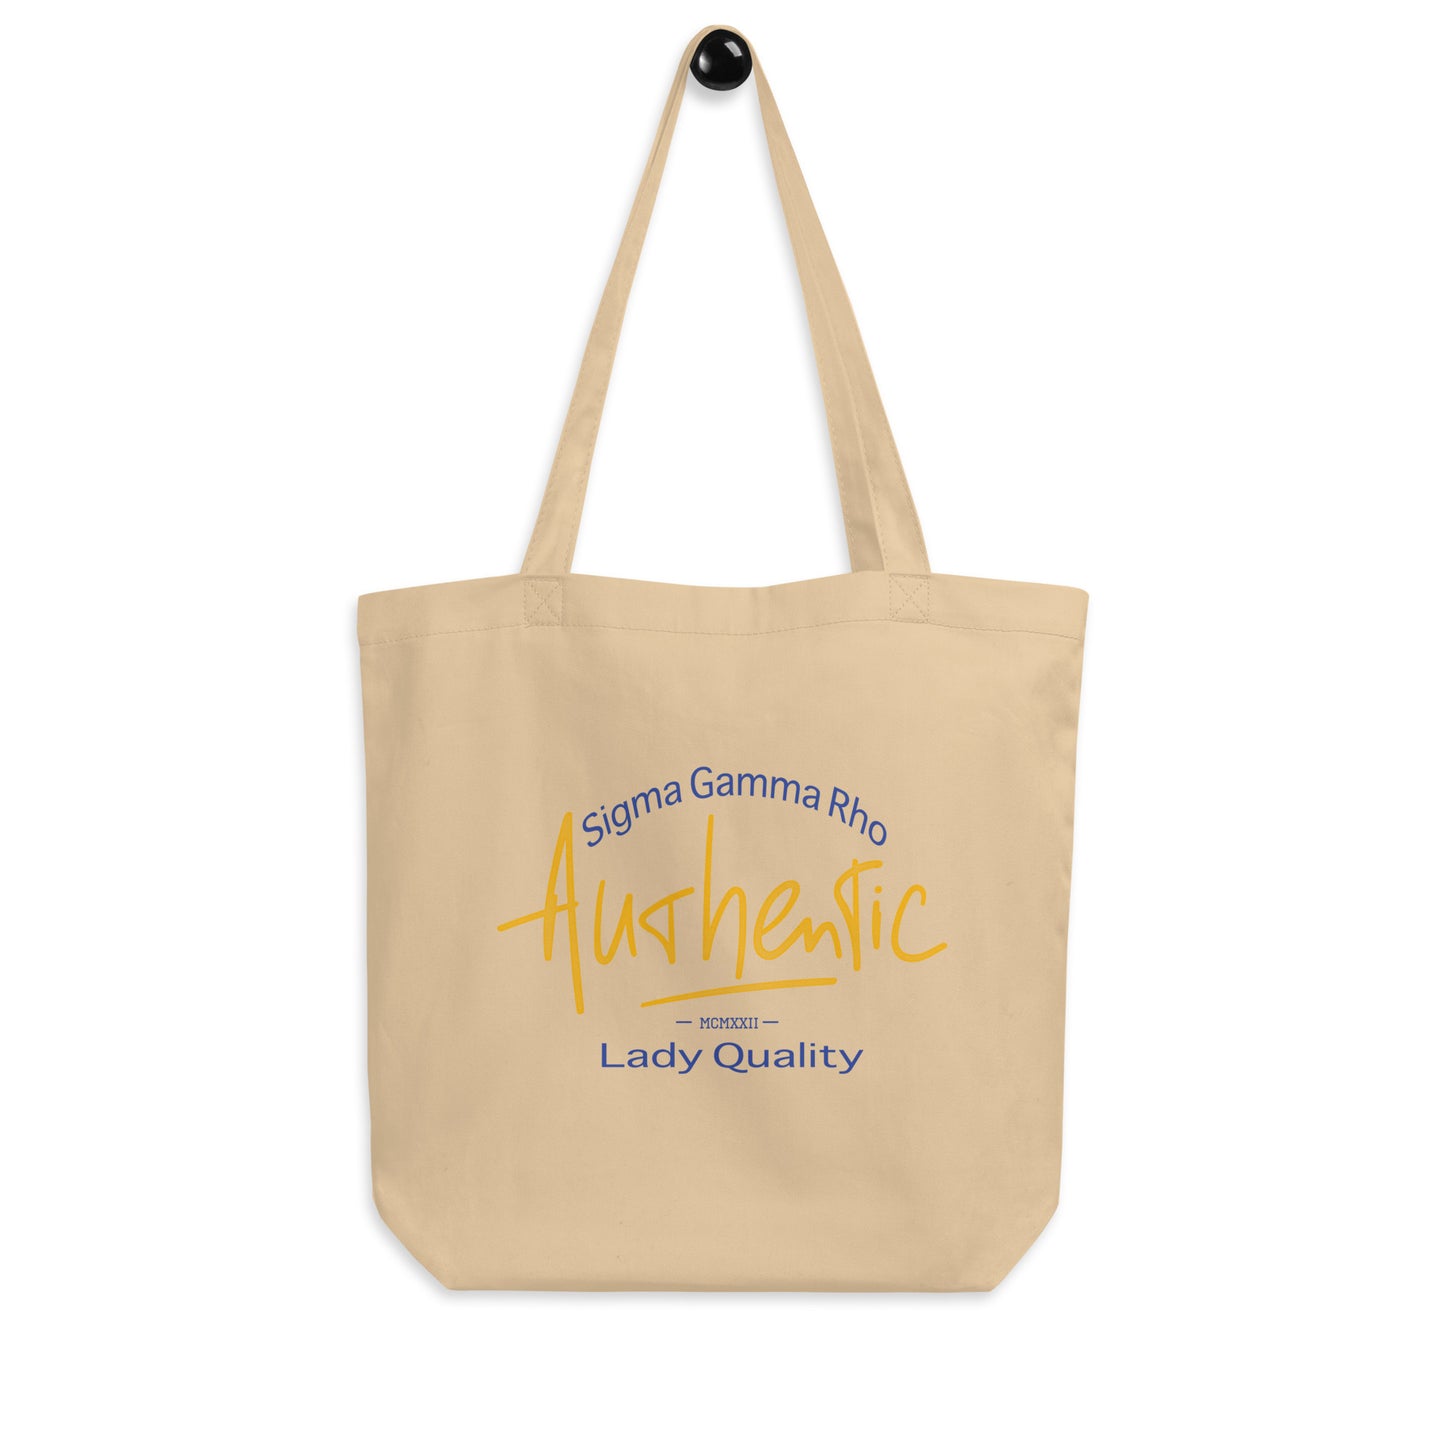 SGRho Authentic Tote Bag